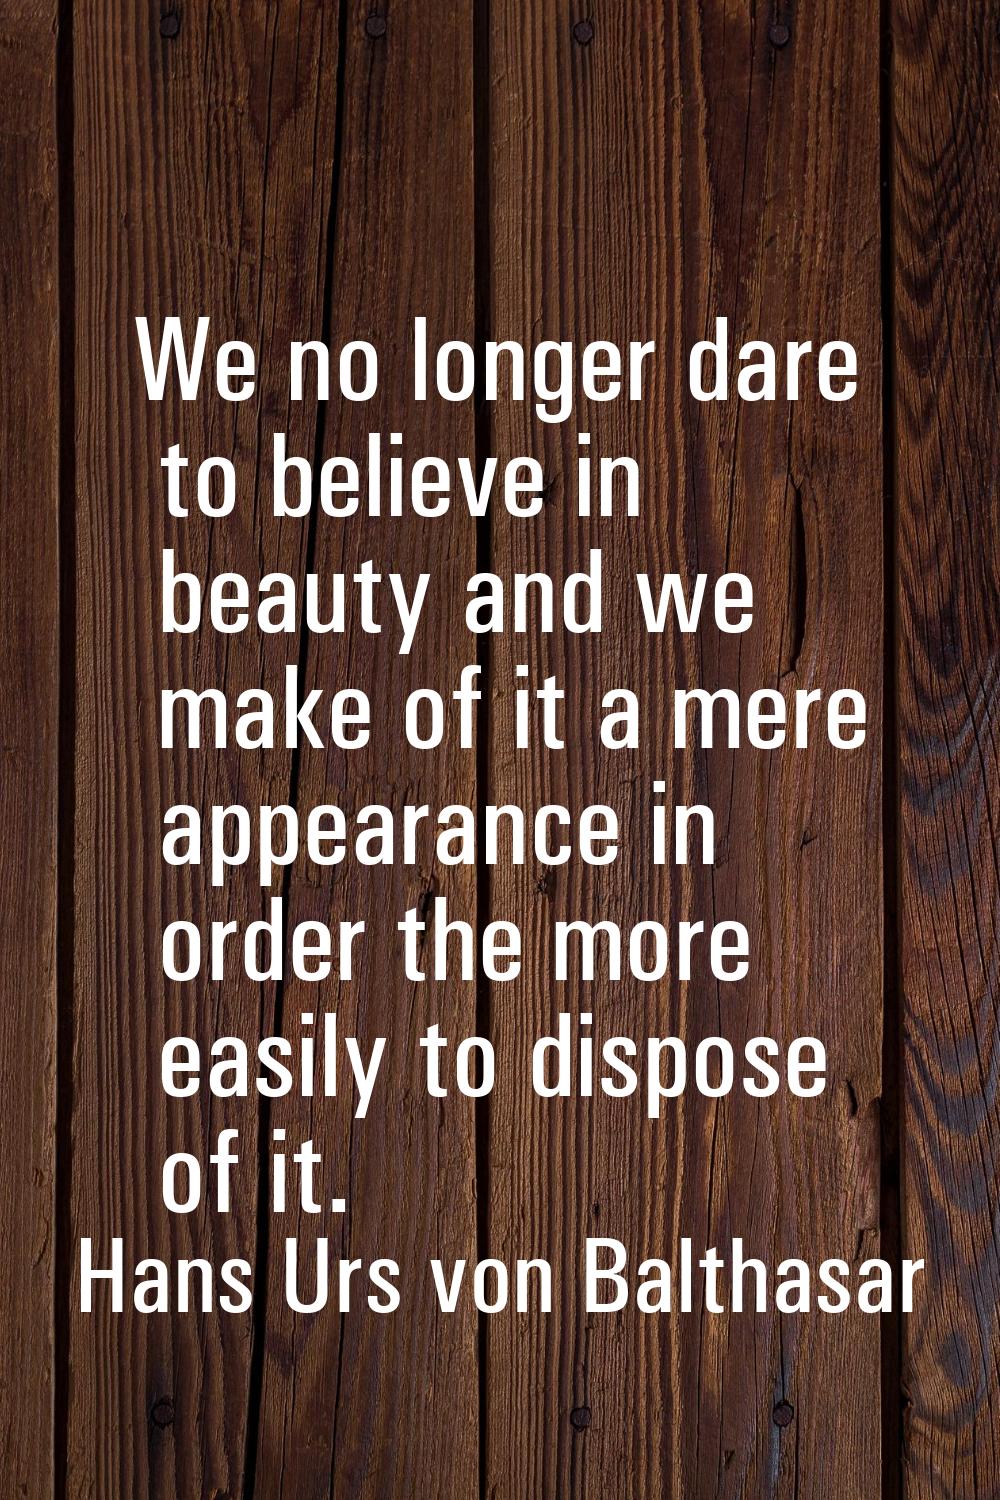 We no longer dare to believe in beauty and we make of it a mere appearance in order the more easily